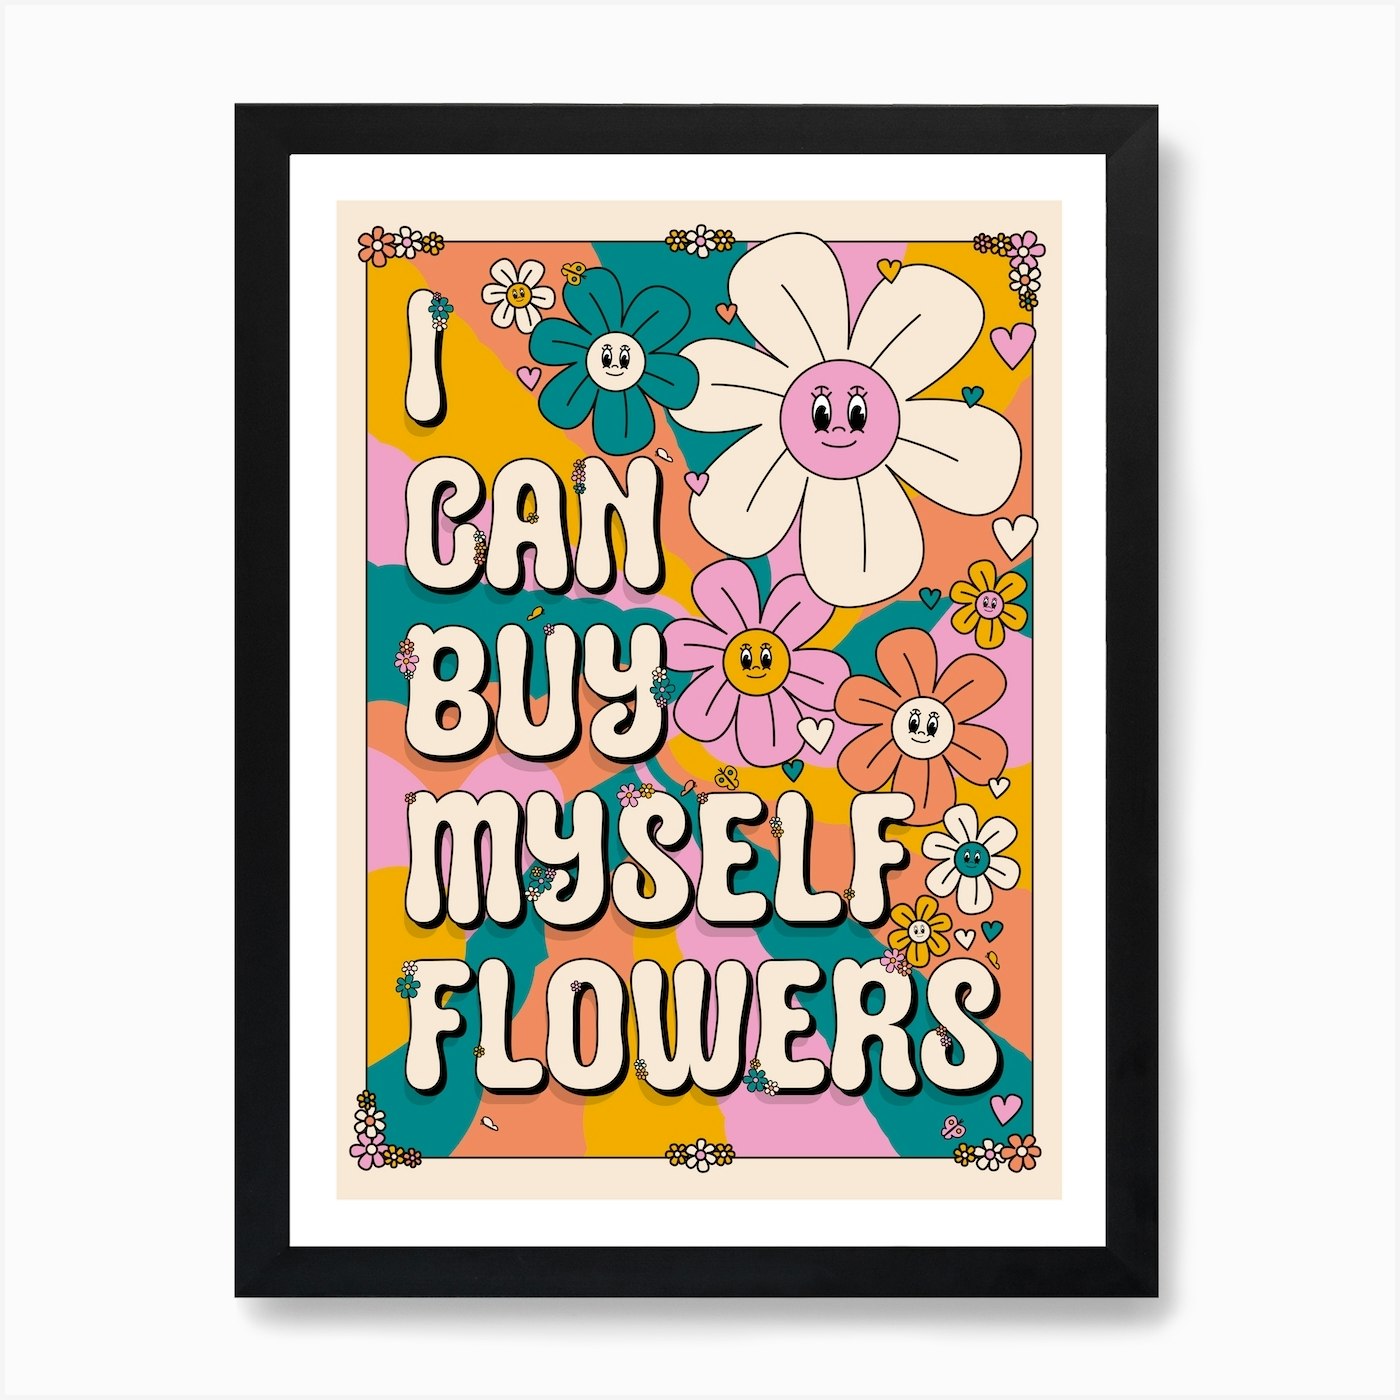 Miley Cyrus FLOWERS Poster. Flowers Wall Art. 